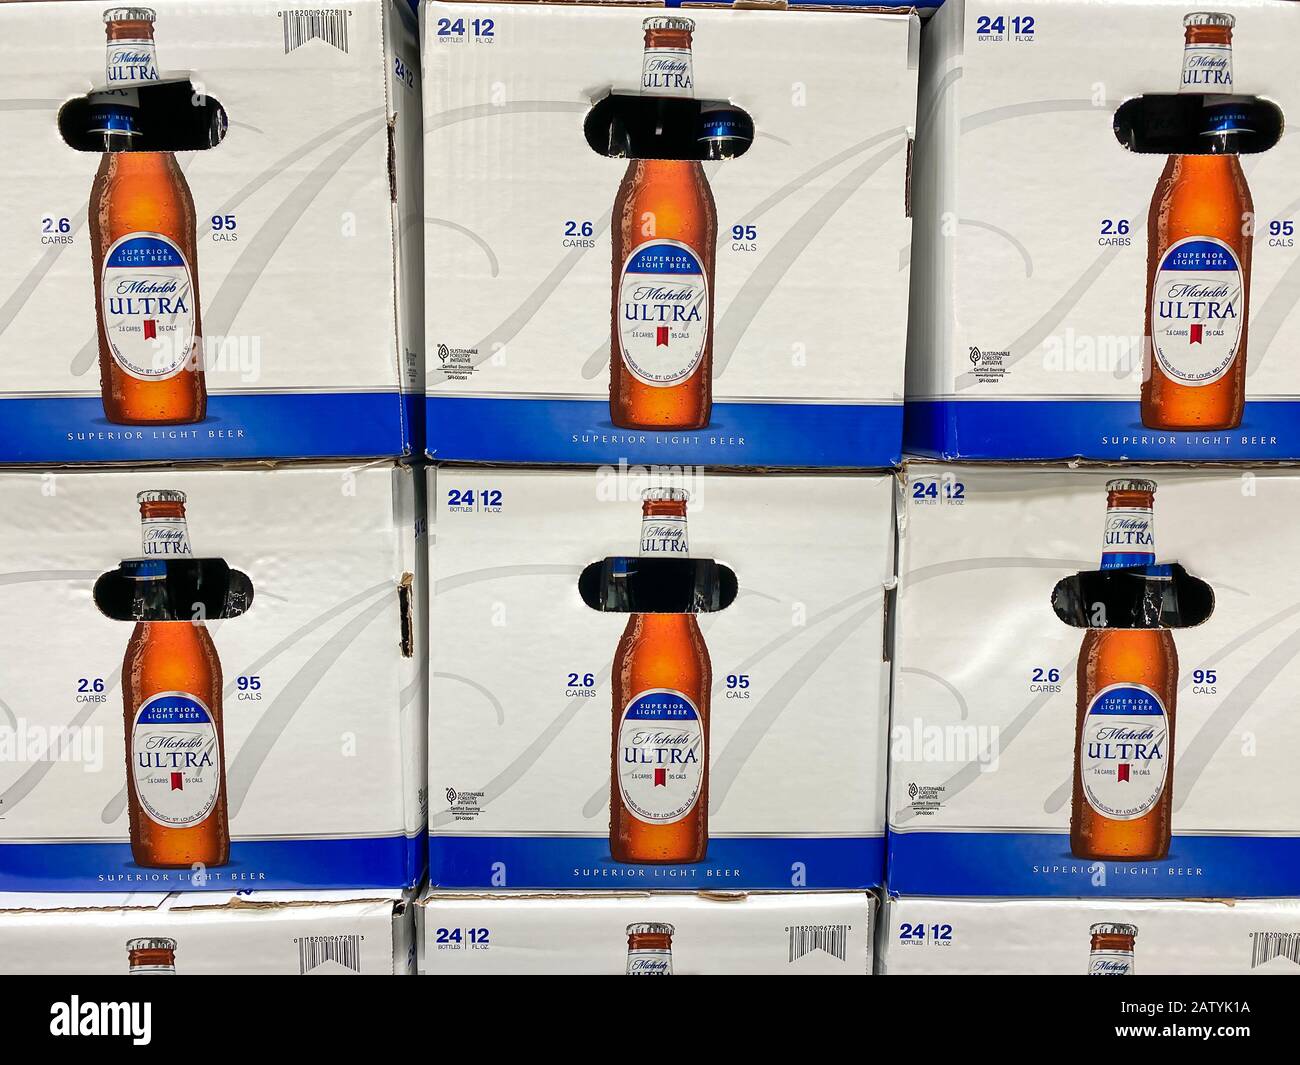 Orlando, FL/USA-2/4/20: Cases of bottles of Michelob Ultra Beer at a grocery store waiting for customers to purchase.  Michelob Ultra is a product of Stock Photo